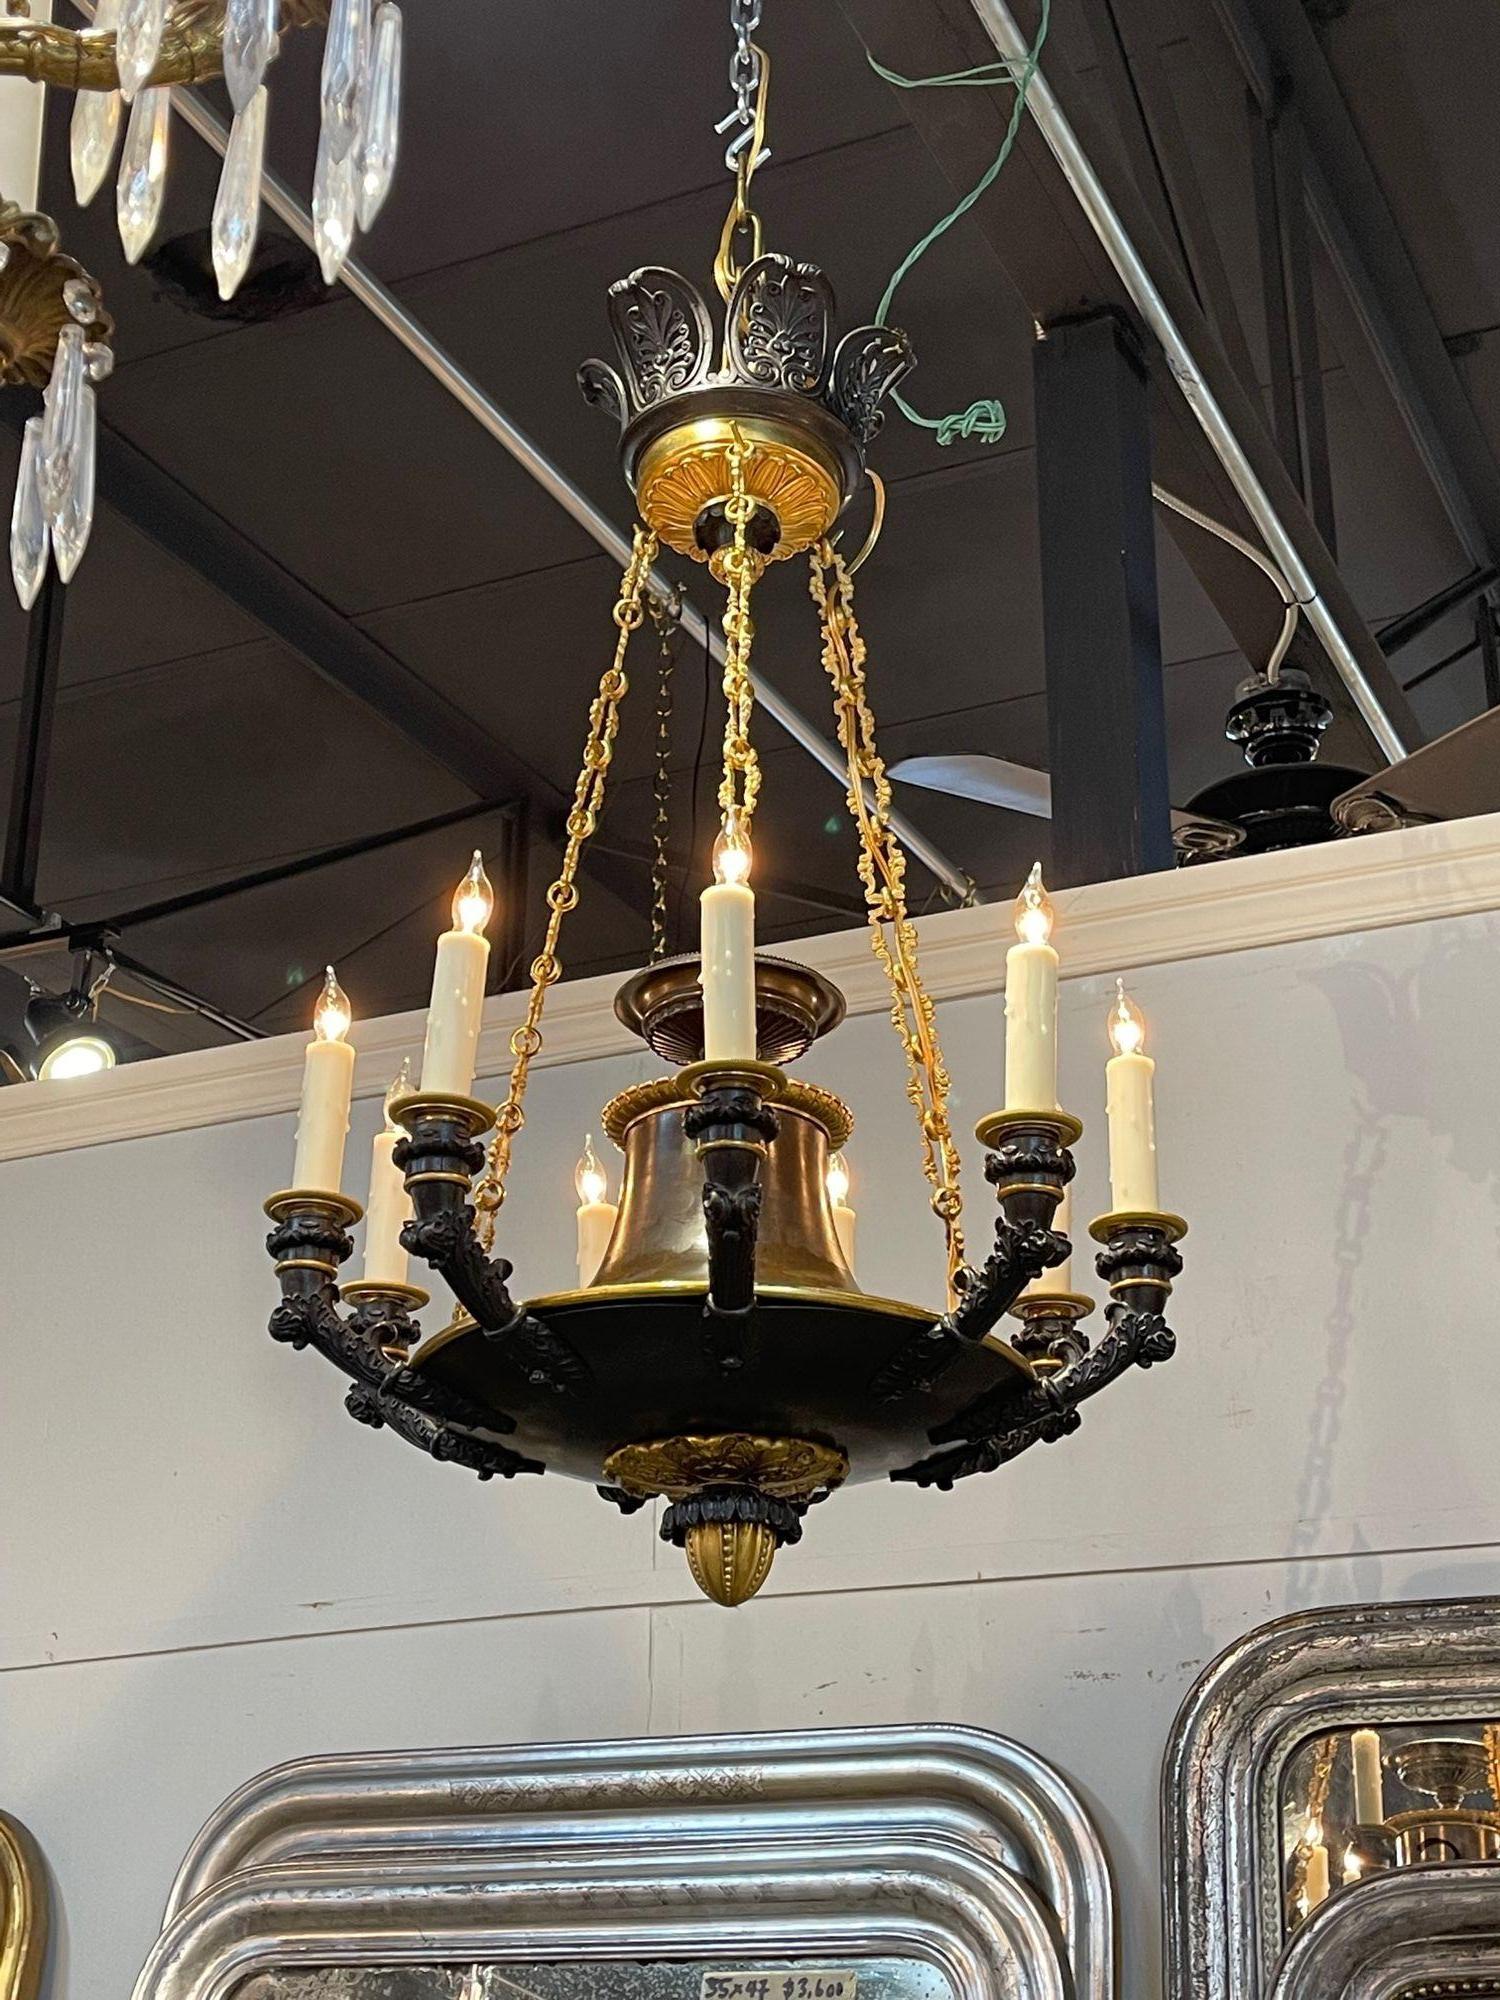 Fine quality 19th century French Empire gilt bronze 9-light chandelier. Circa 1870. The chandelier has been professionally re-wired, cleaned and is ready to hang. Includes matching chain and canopy.